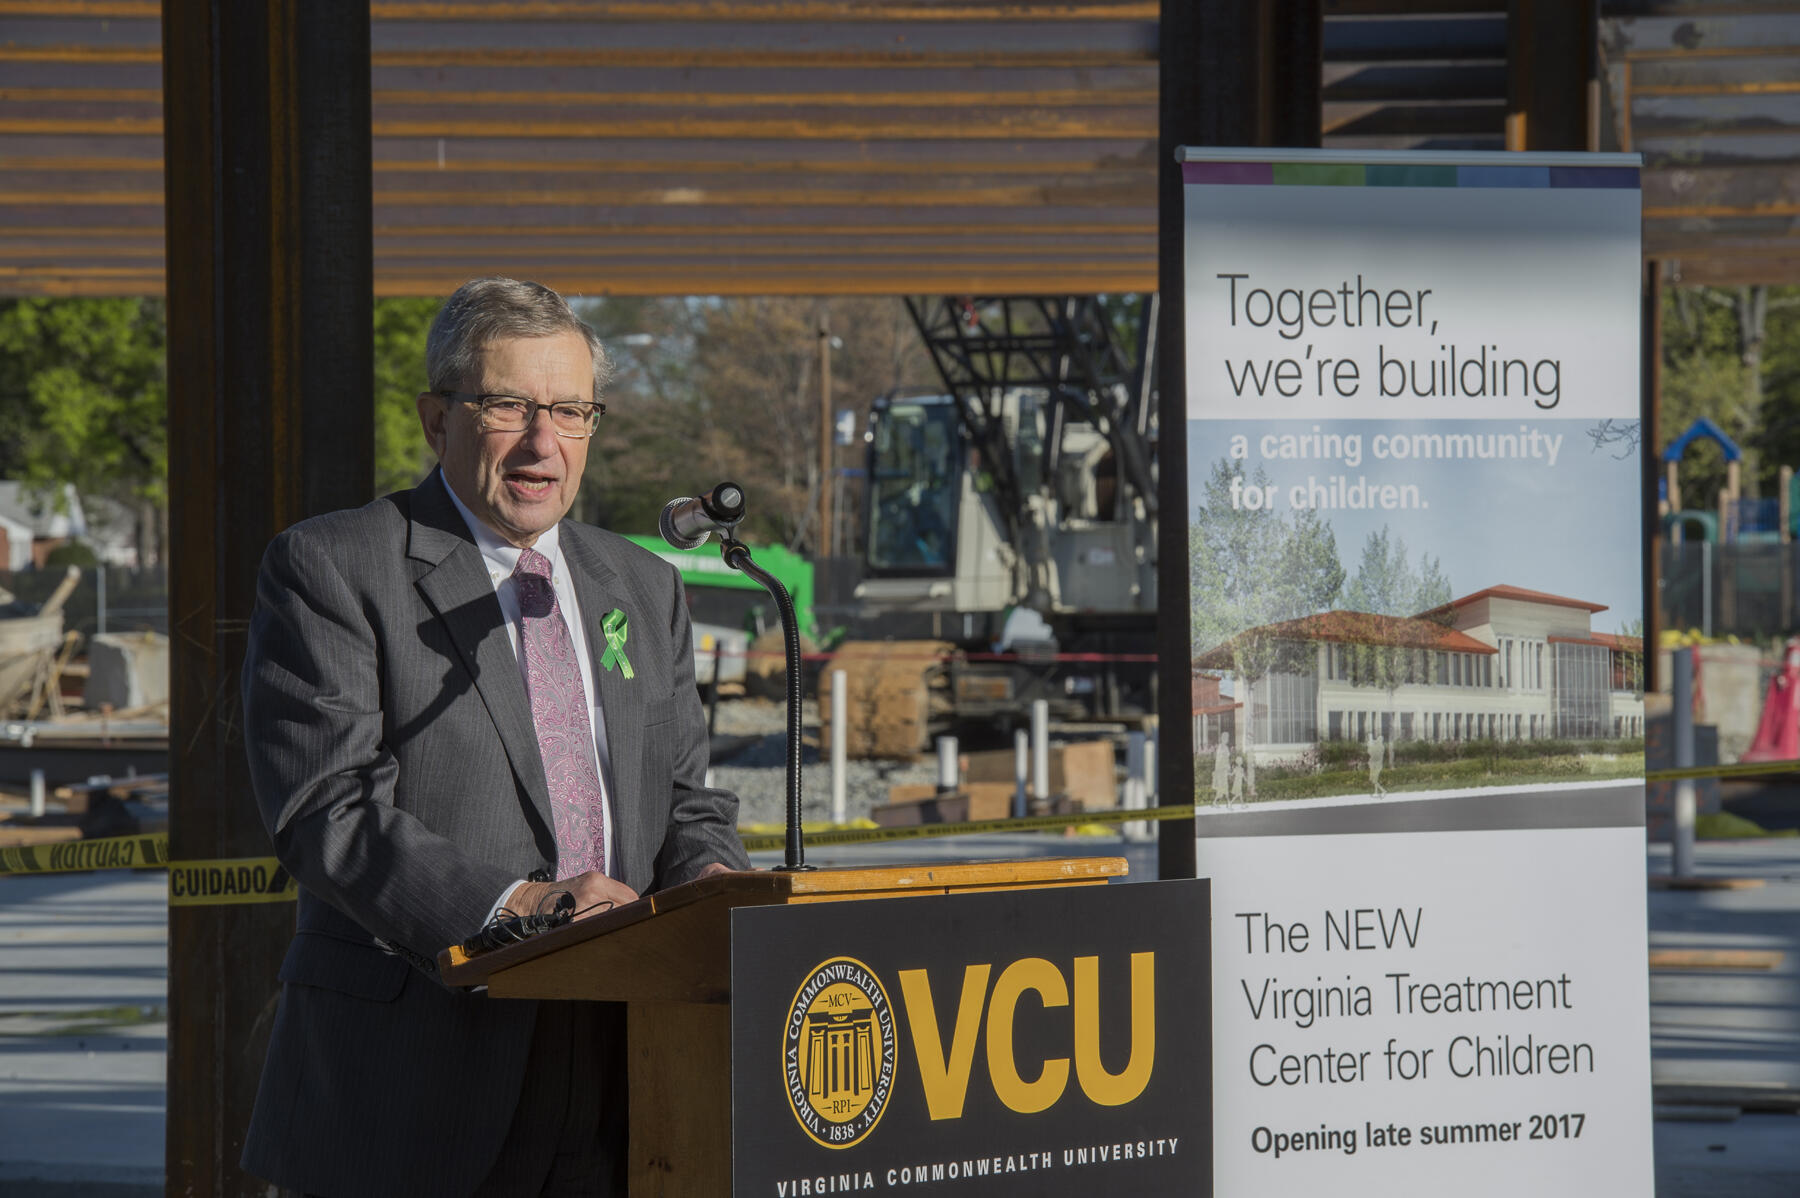 Joel Silverman, M.D., chair of the VCU Department of Psychiatry in the School of Medicine, said the steel beam is a metaphor for strength, the strength of VTCC’s mental health team and the families it serves. 